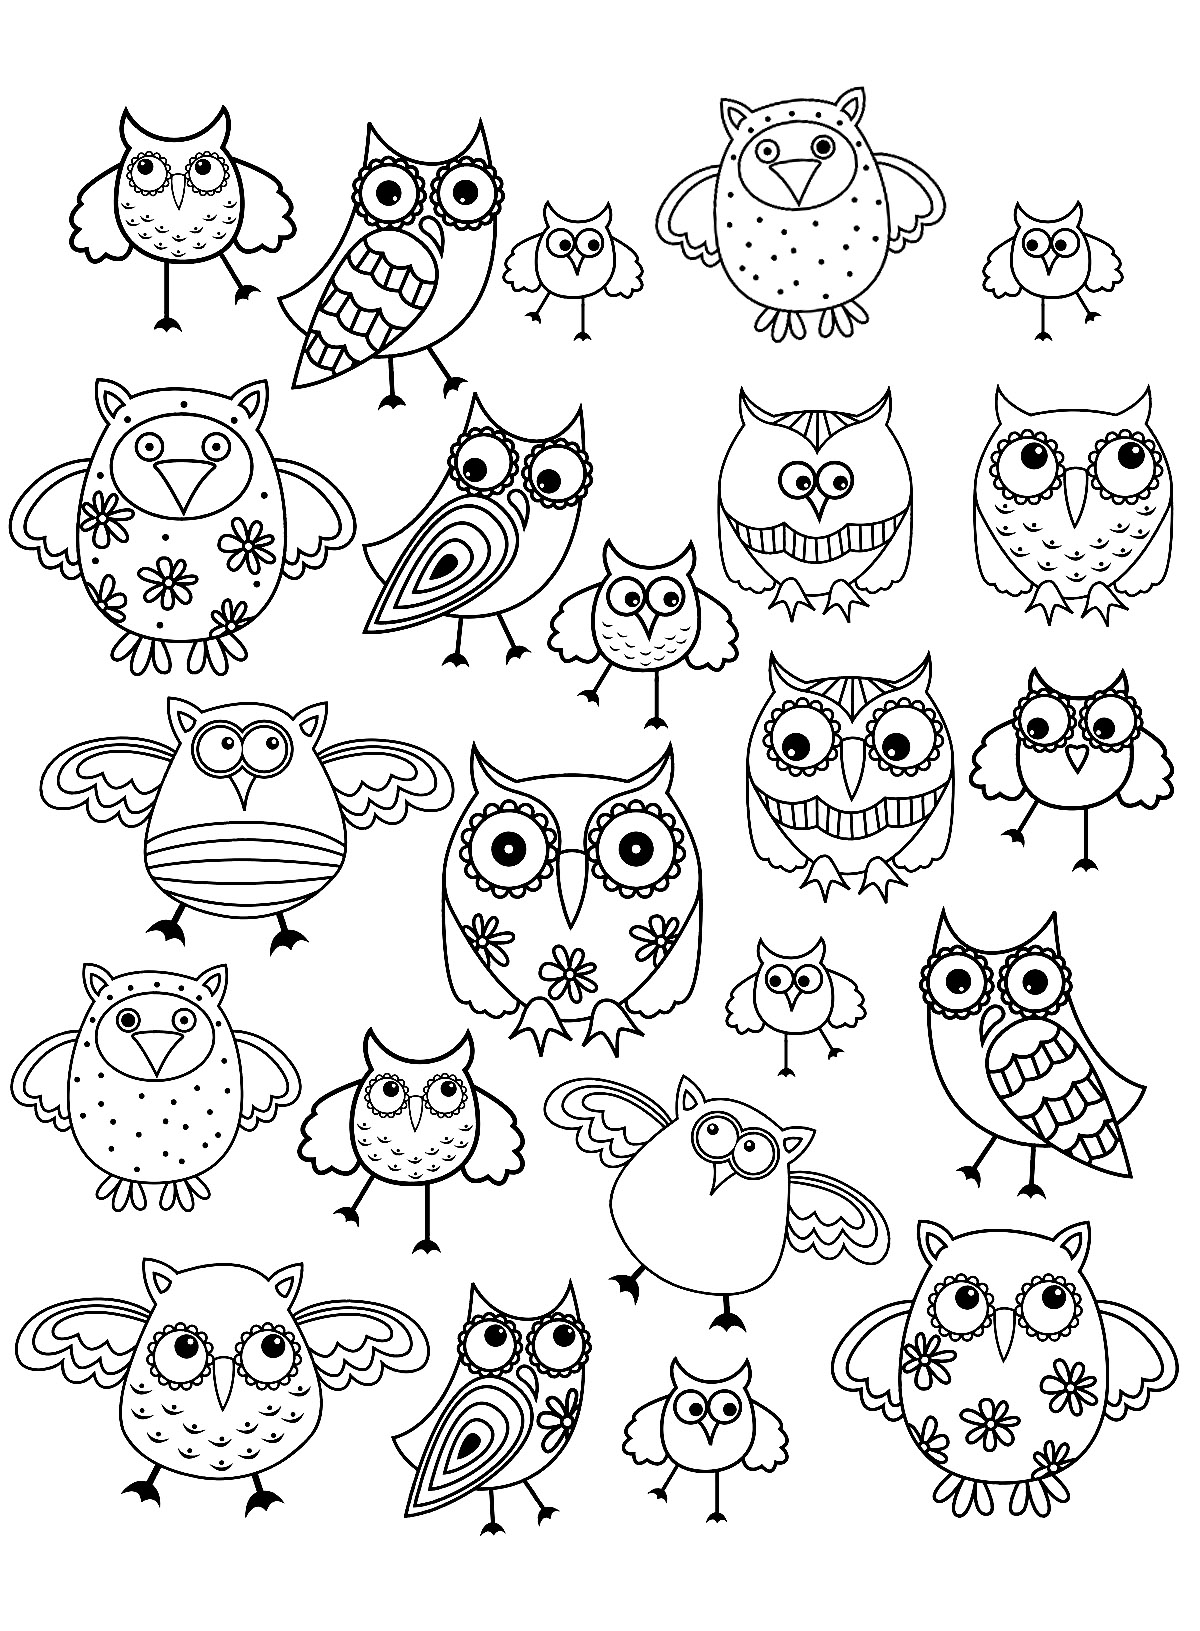 Simple Doodle Art coloring page